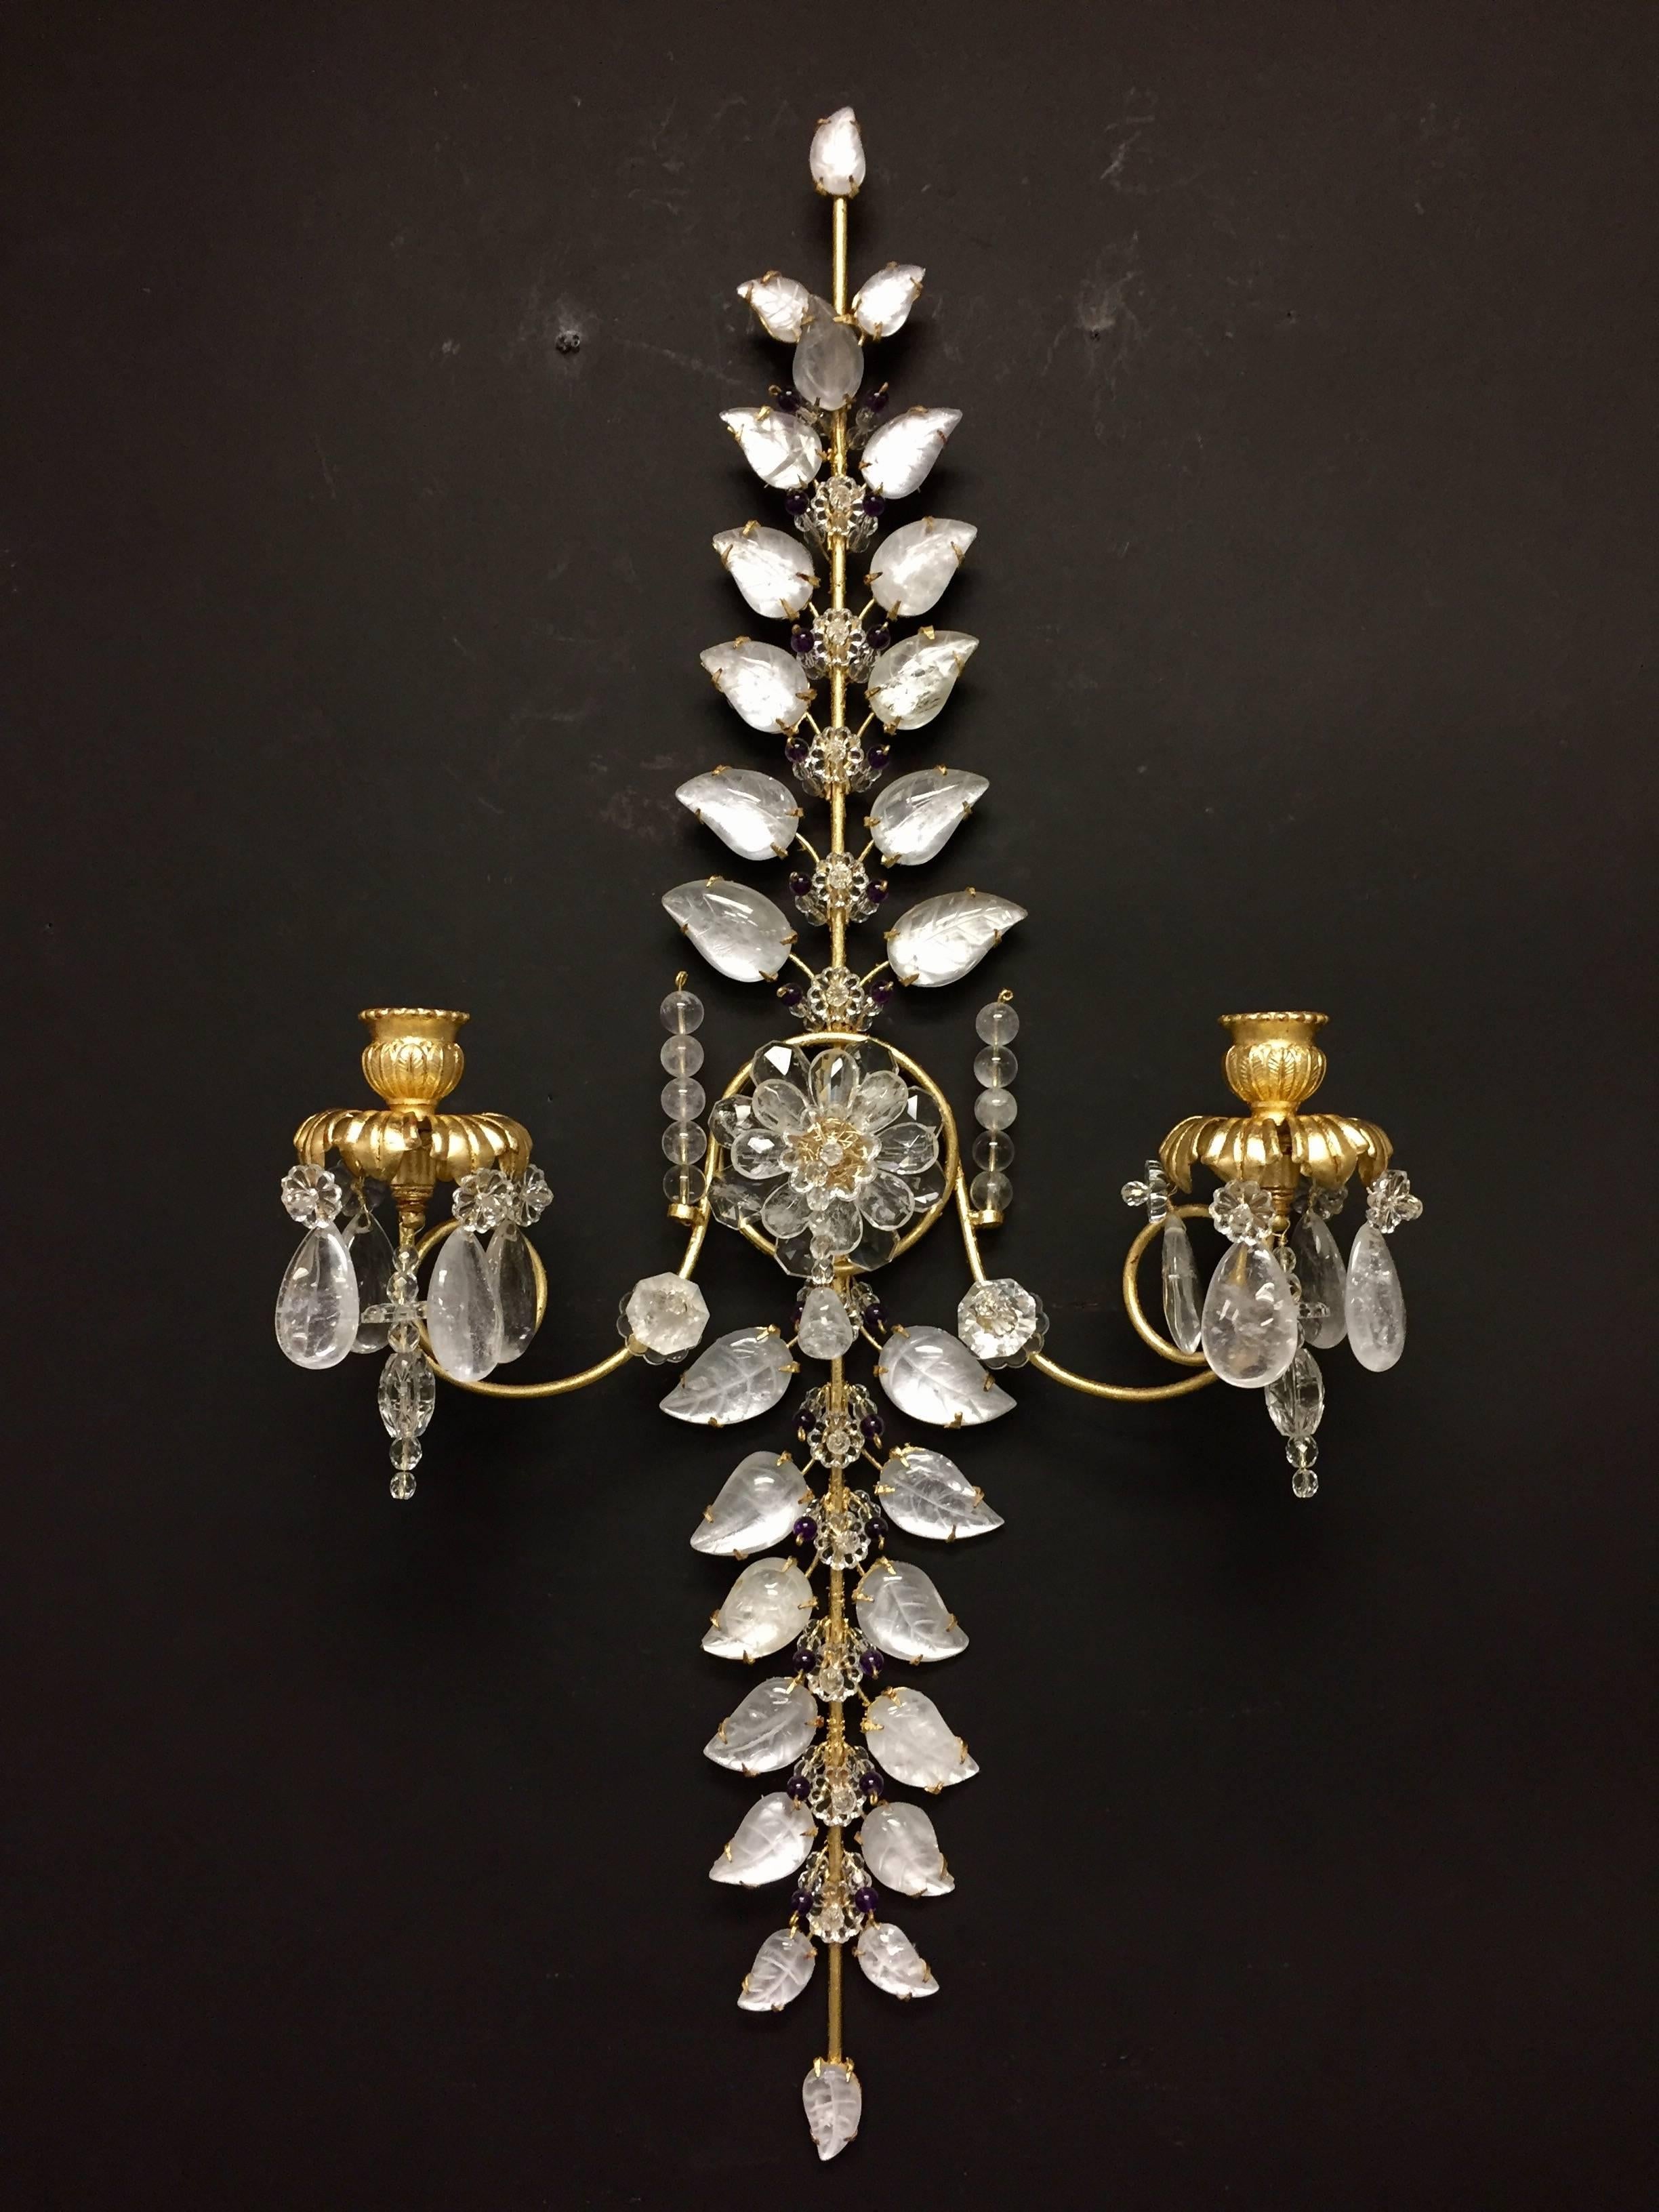 Wonderful pair of gilt two-arm sconces with rock crystal leaves, rock crystal pendants on the bobeches and amethyst crystal beads.
Wiring is available for additional $350
Measures: 28